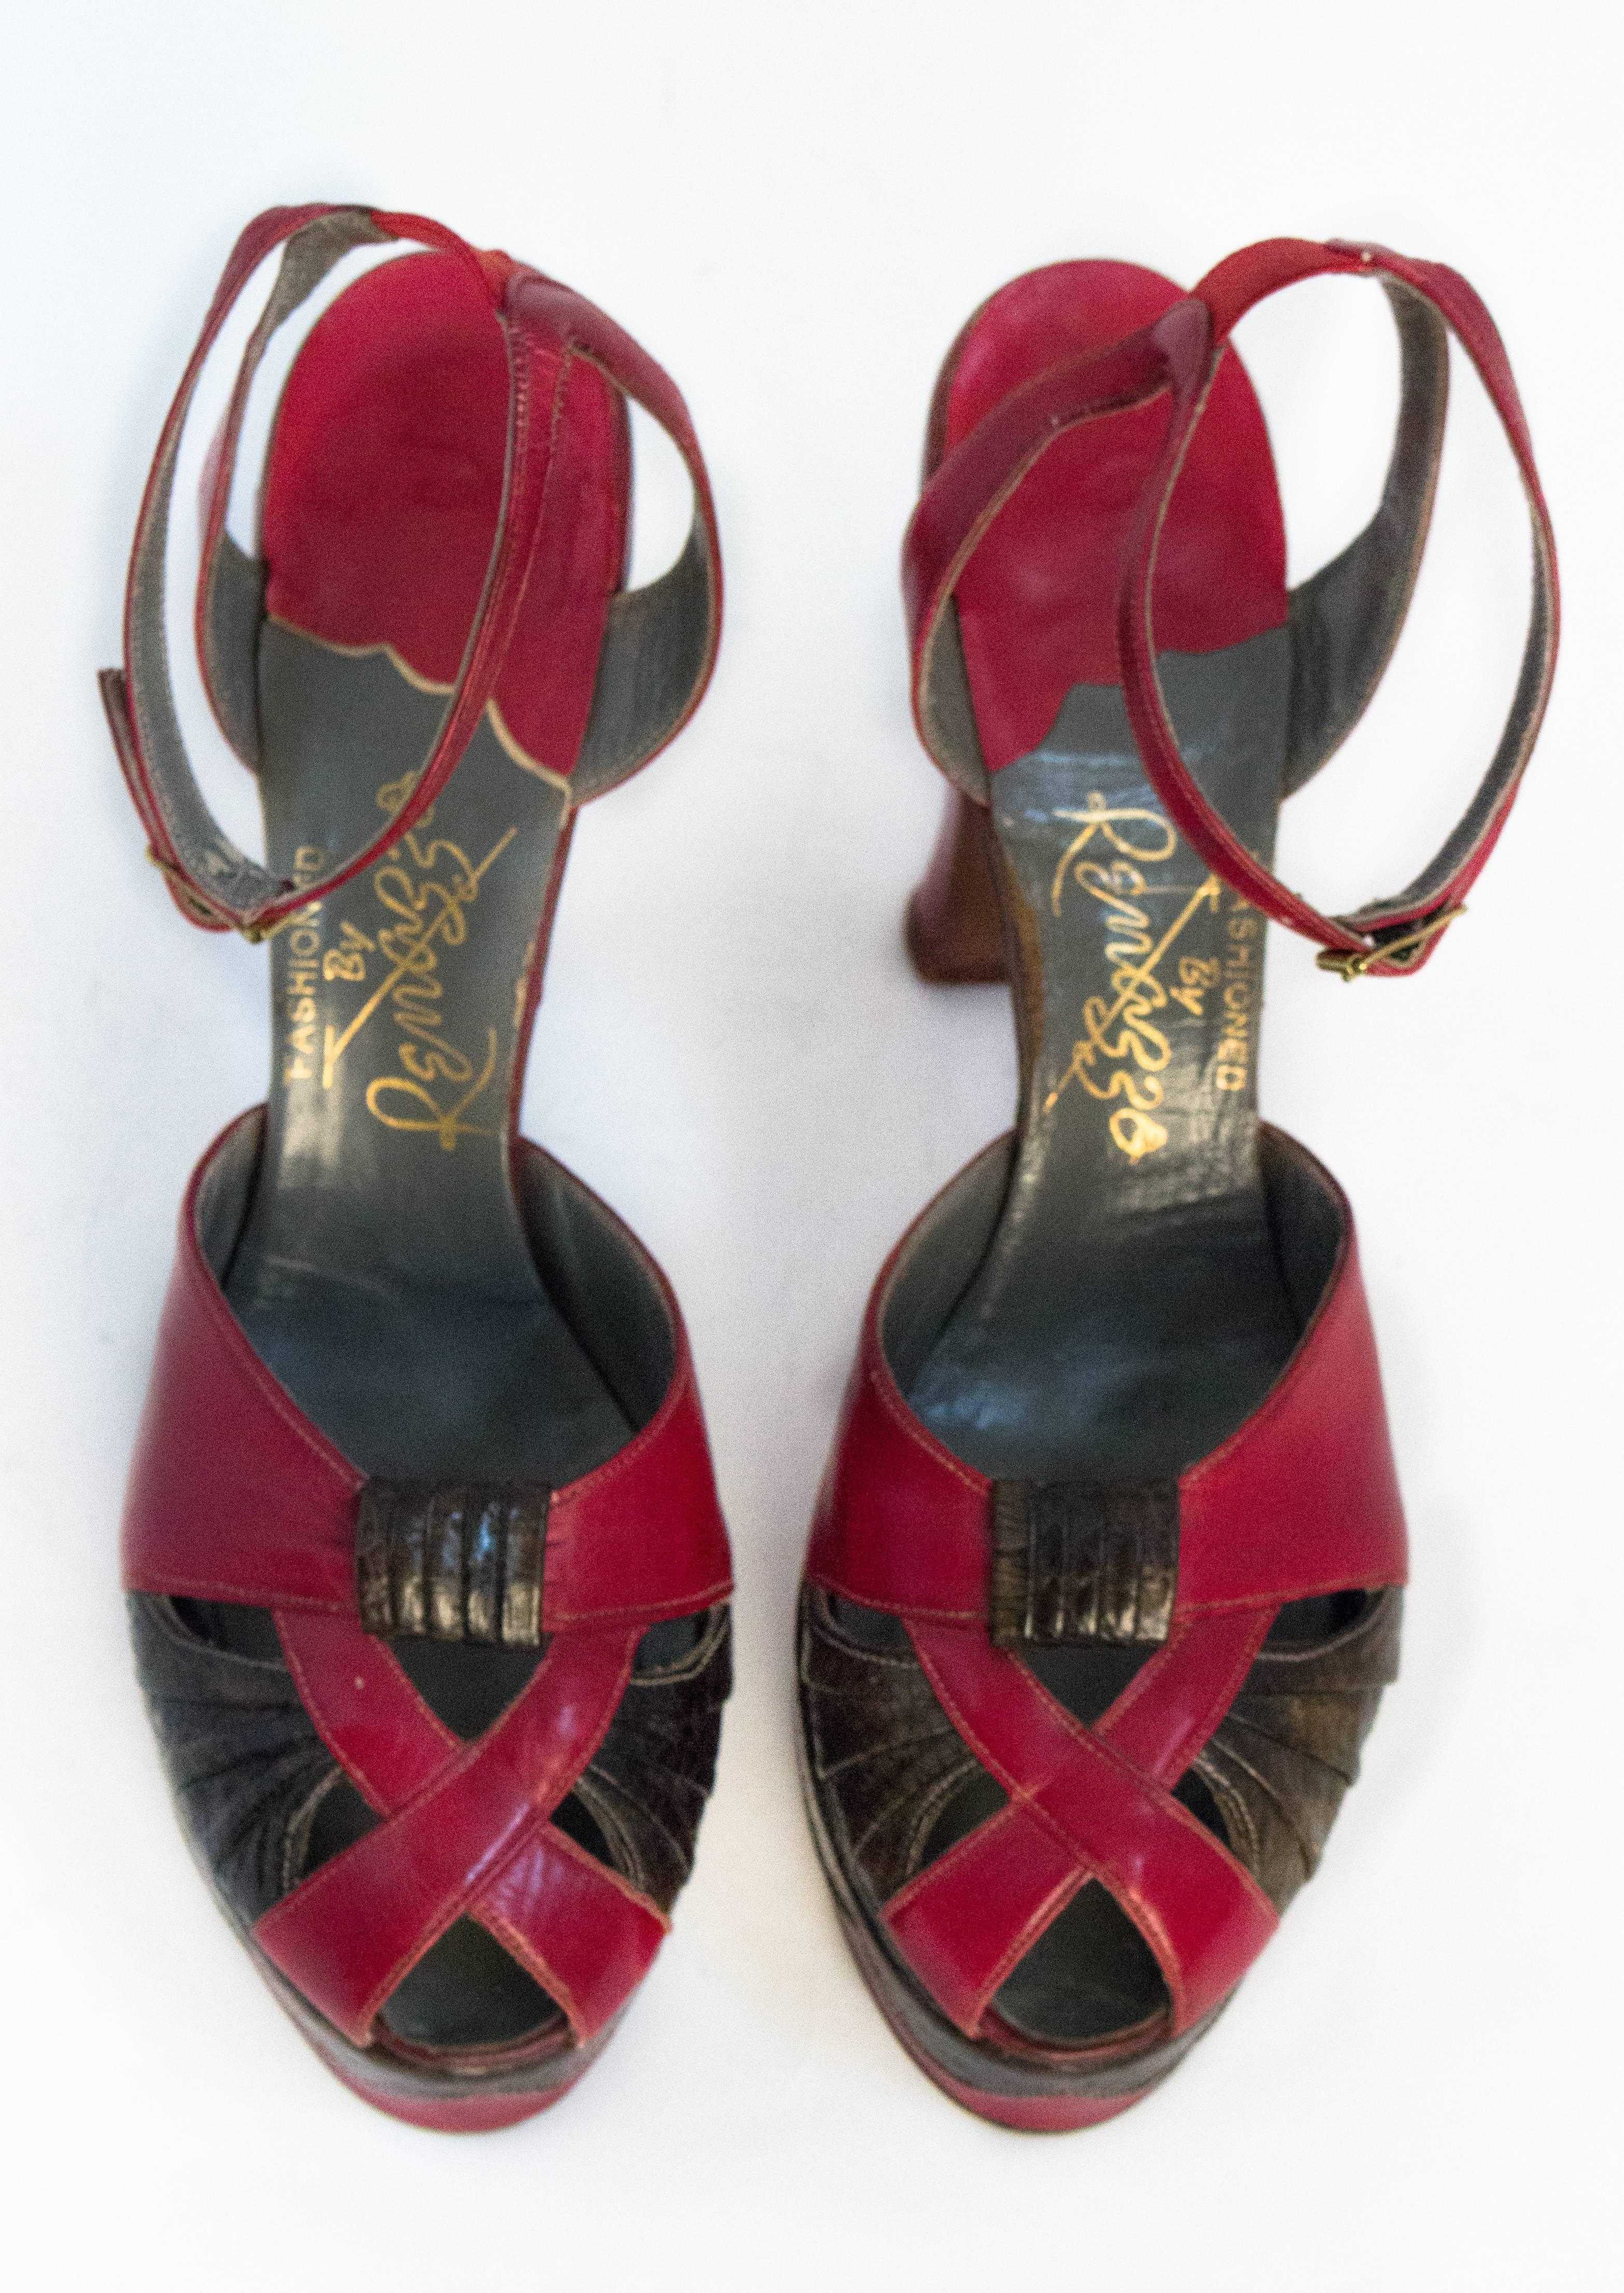 40s red leather and snakeskin platforms with ankle strap. 1 inch of elastic at the back of the heel allows for some give. Leather soles. 

Measurements:
Insole: 9 3/4